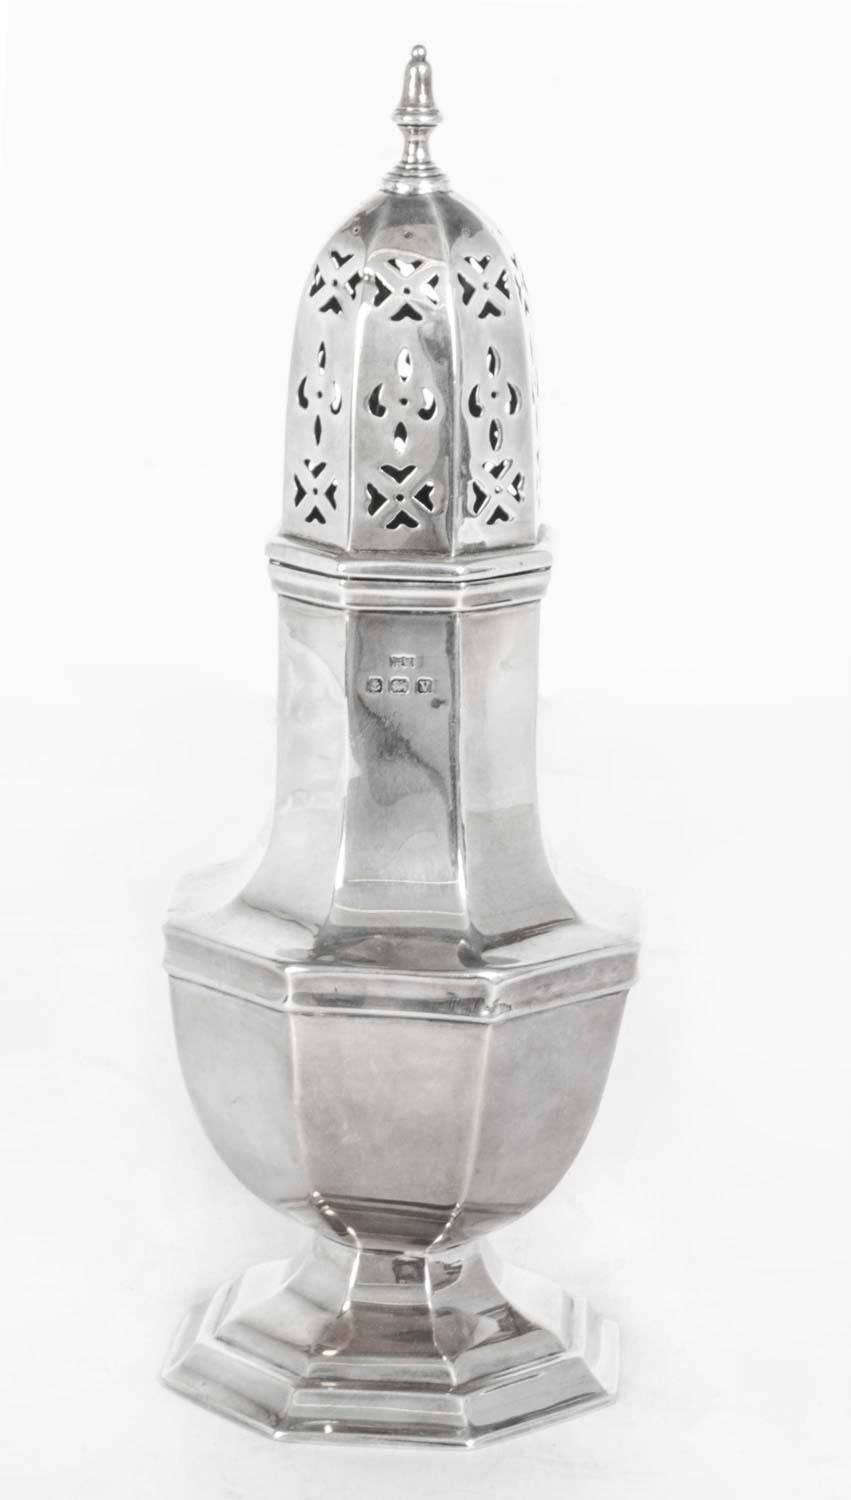 An exquisite antique English silver sugar castor/sifter with hallmarks for Birmingham, 1920 and the makers mark of Charles Wilkes of Mott Street, Birmingham.

A truly beautiful and high quality piece that would make a fine addition to any antique